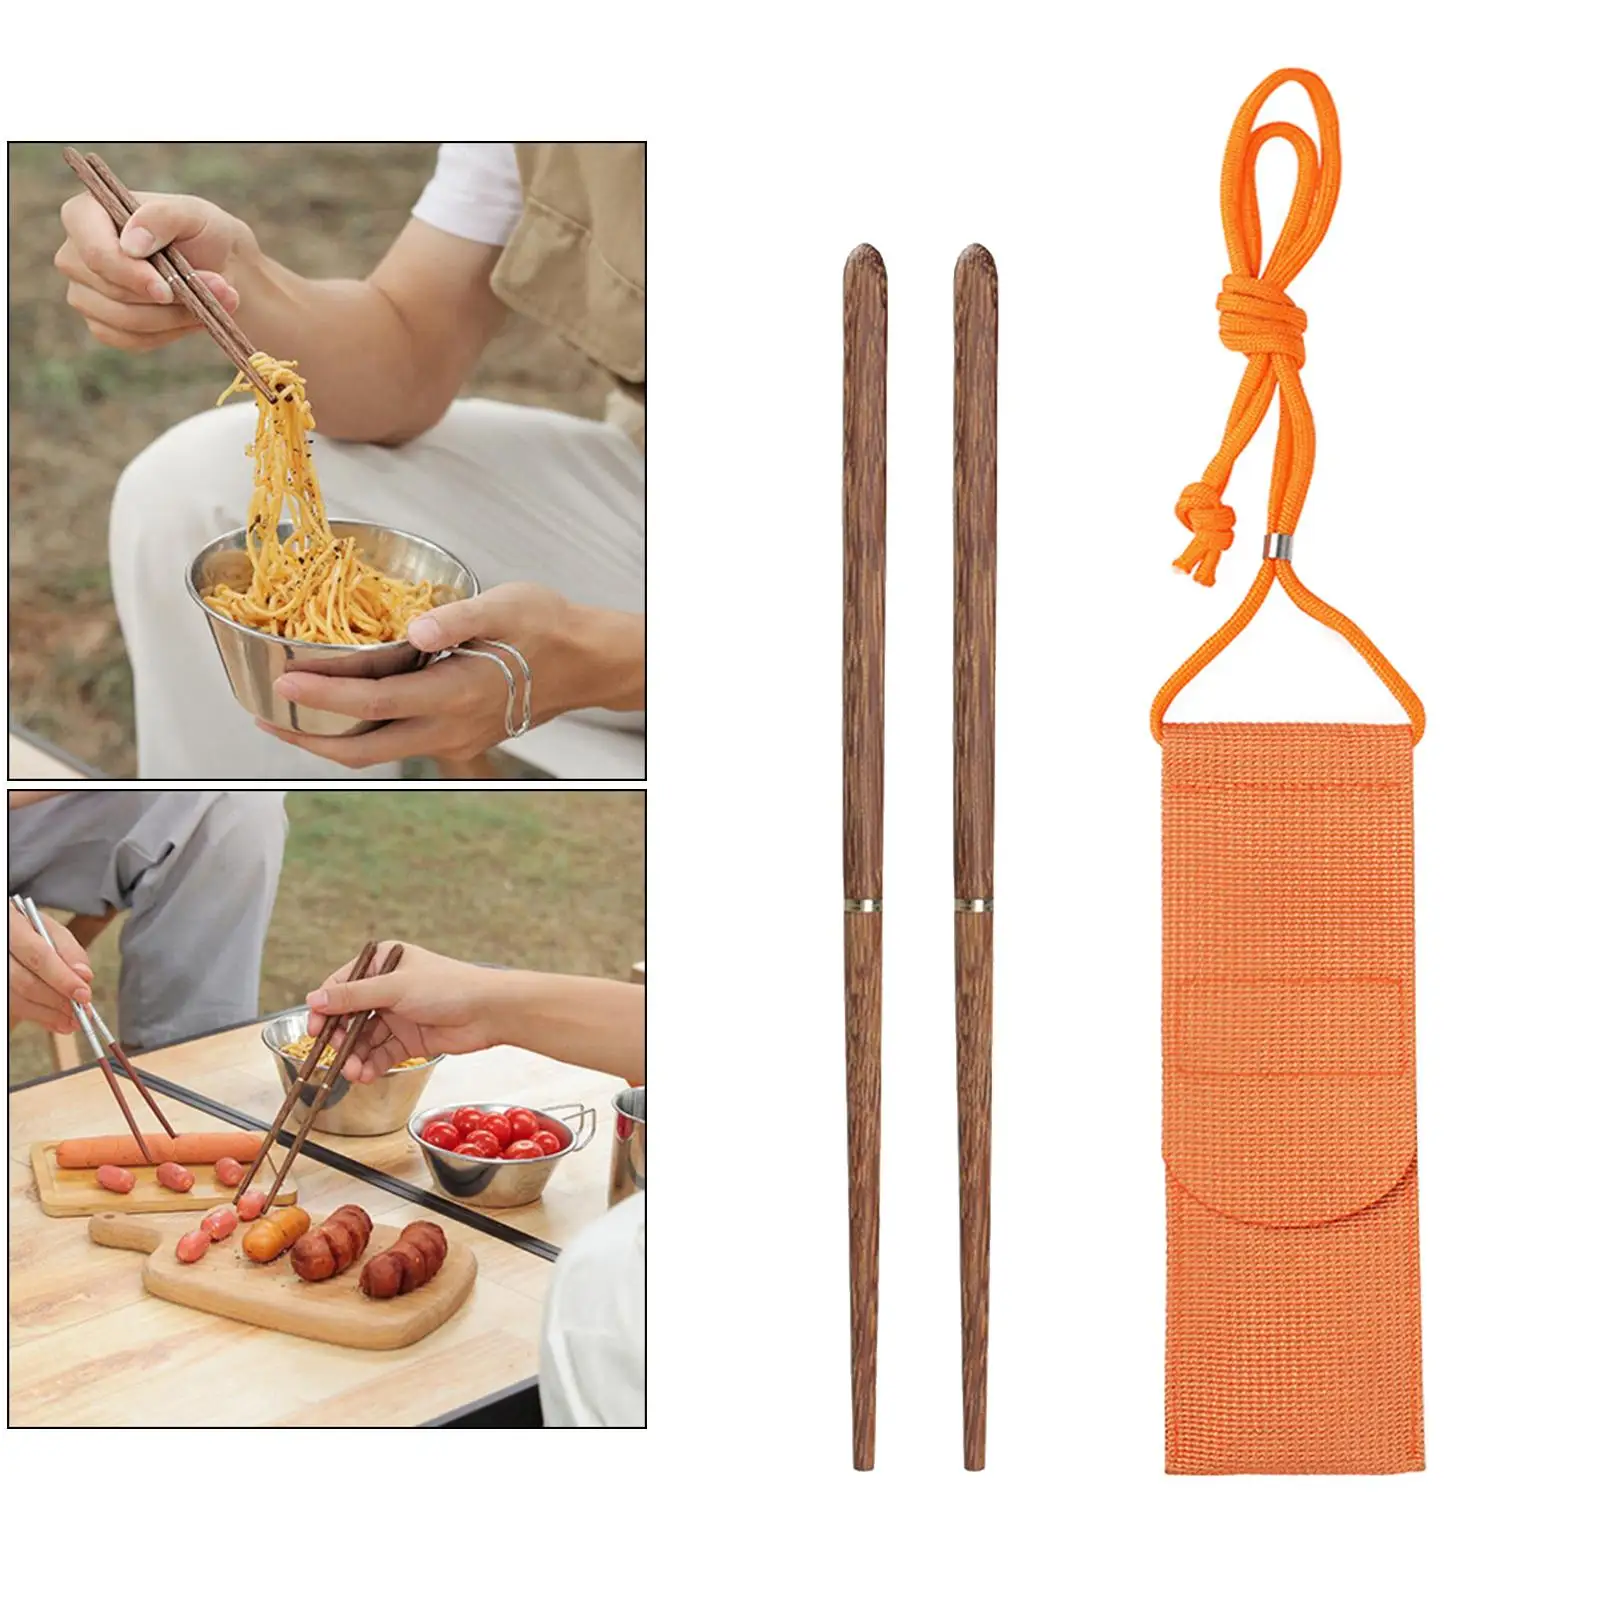 Stainless steel  Chopsticks Screw in/ Apart Reusable Travel Foldable Chopsticks with Pouch